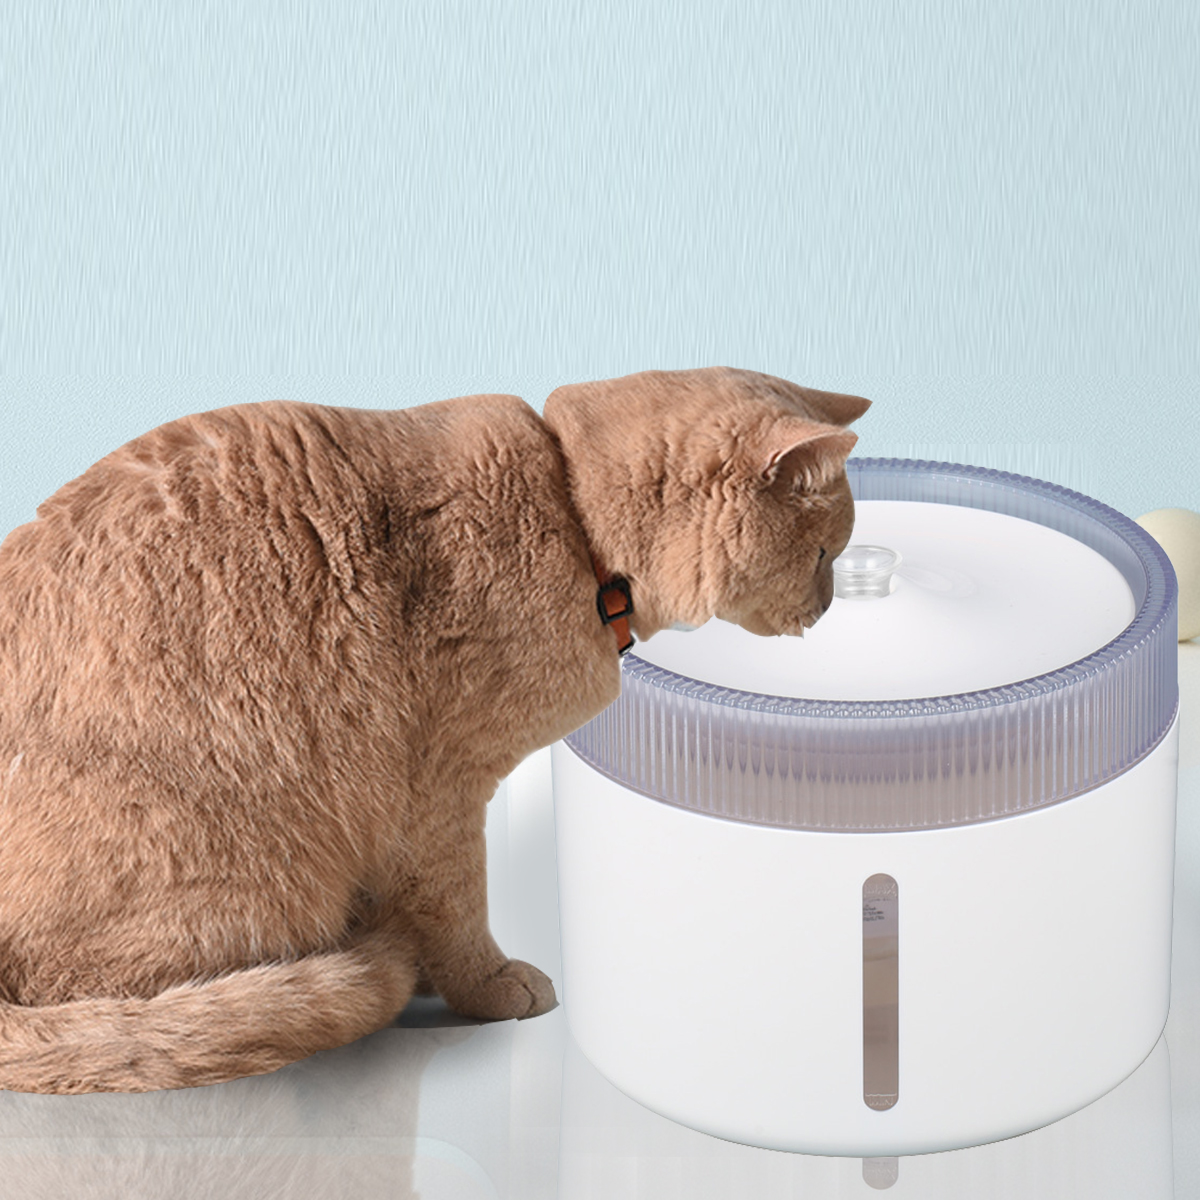 2L-LED-USB-Auto-Electric-Pet-Water-Fountain-CatDog-Drinking-Dispenser-1926496-13